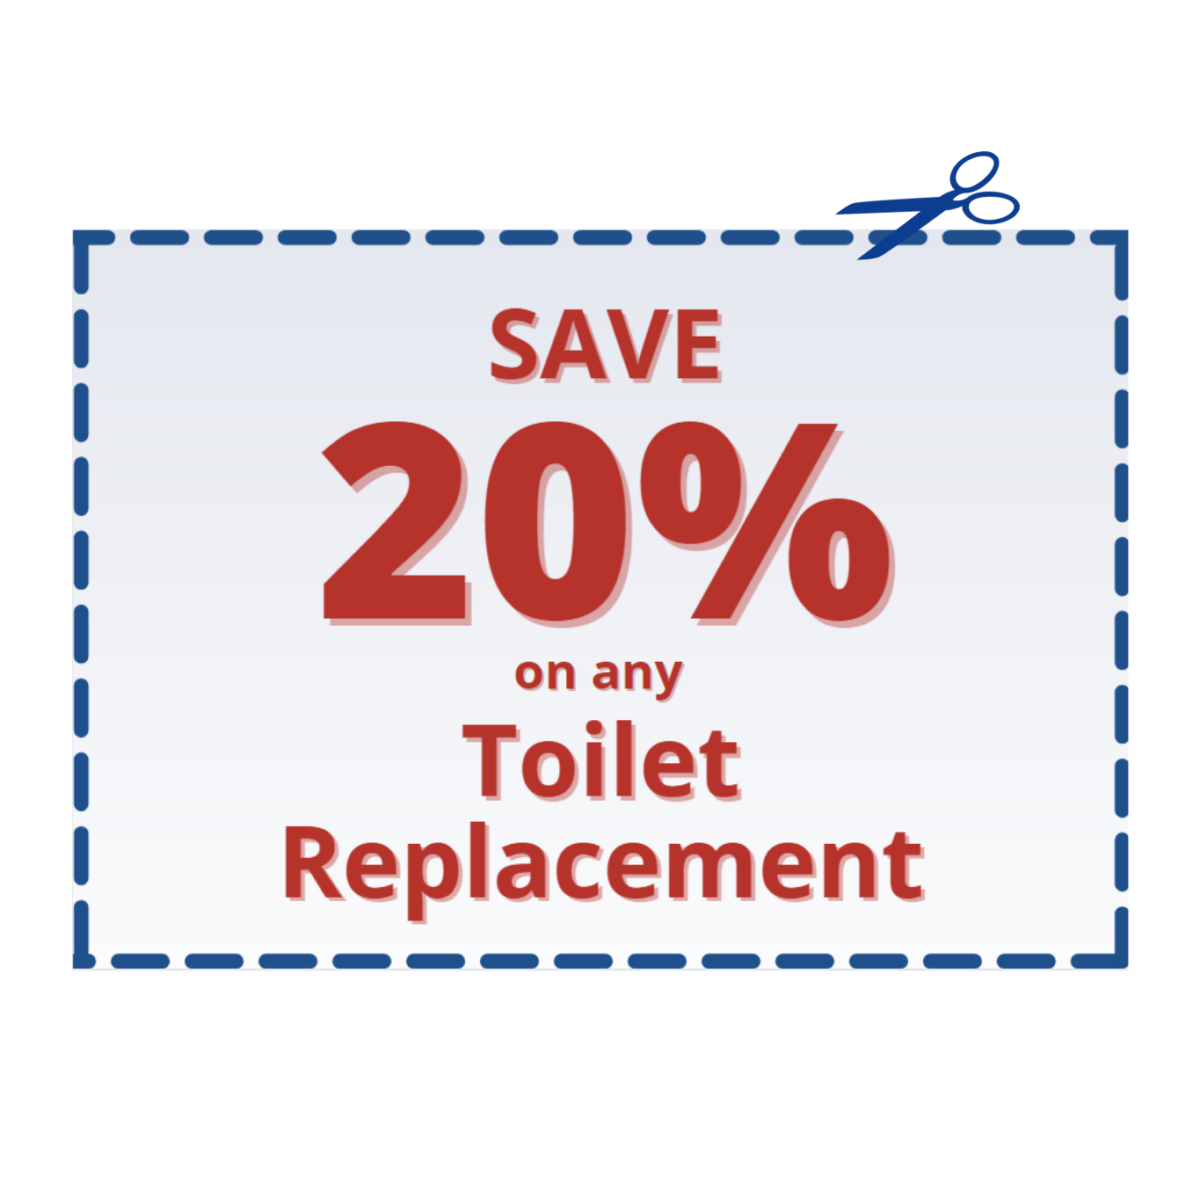 20% on any Toilet Replacement - click for coupon